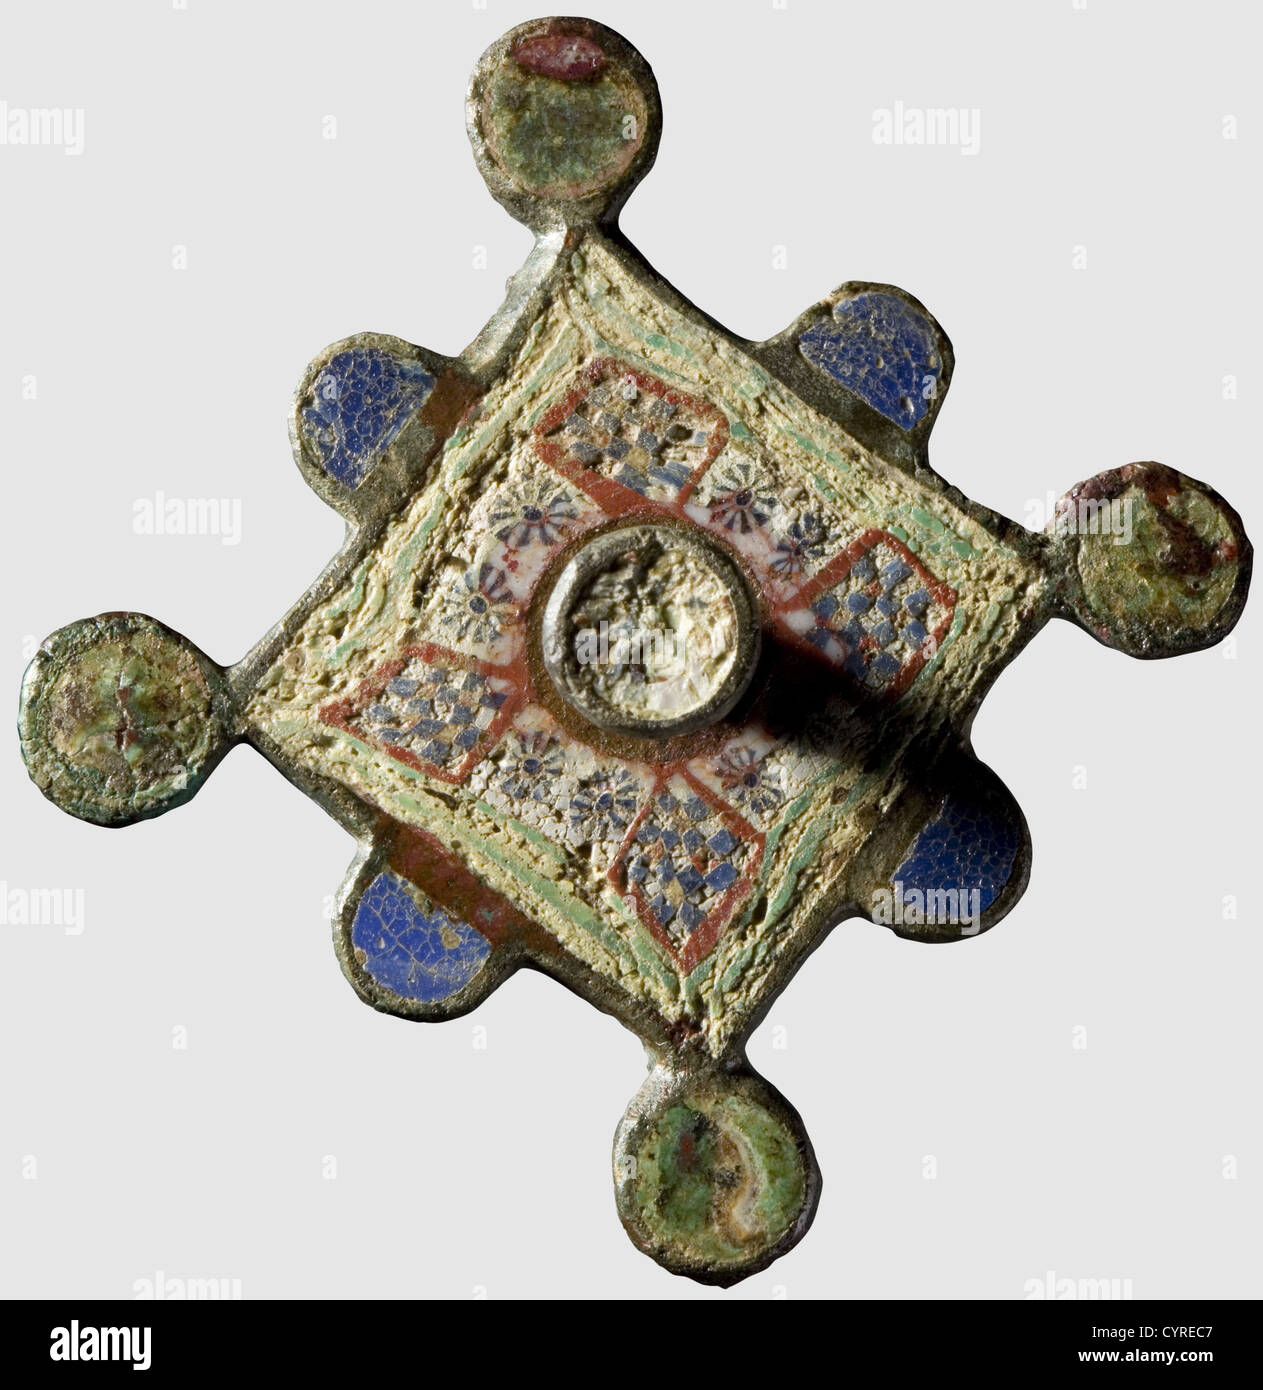 A large Roman millefiori fibula, 2nd/3rd century A.D. Bronze with greenish patina. Square plate mit surrounding circular ornaments. The obverse with well preserved enamelled decor, the centre inlaid with millefiori glass. Remains of the needle socket on the back. Diameter 4.9 cm, historic, historical, ancient world, ancient world, ancient times, object, objects, stills, clipping, cut out, cut-out, cut-outs, Additional-Rights-Clearences-Not Available Stock Photo